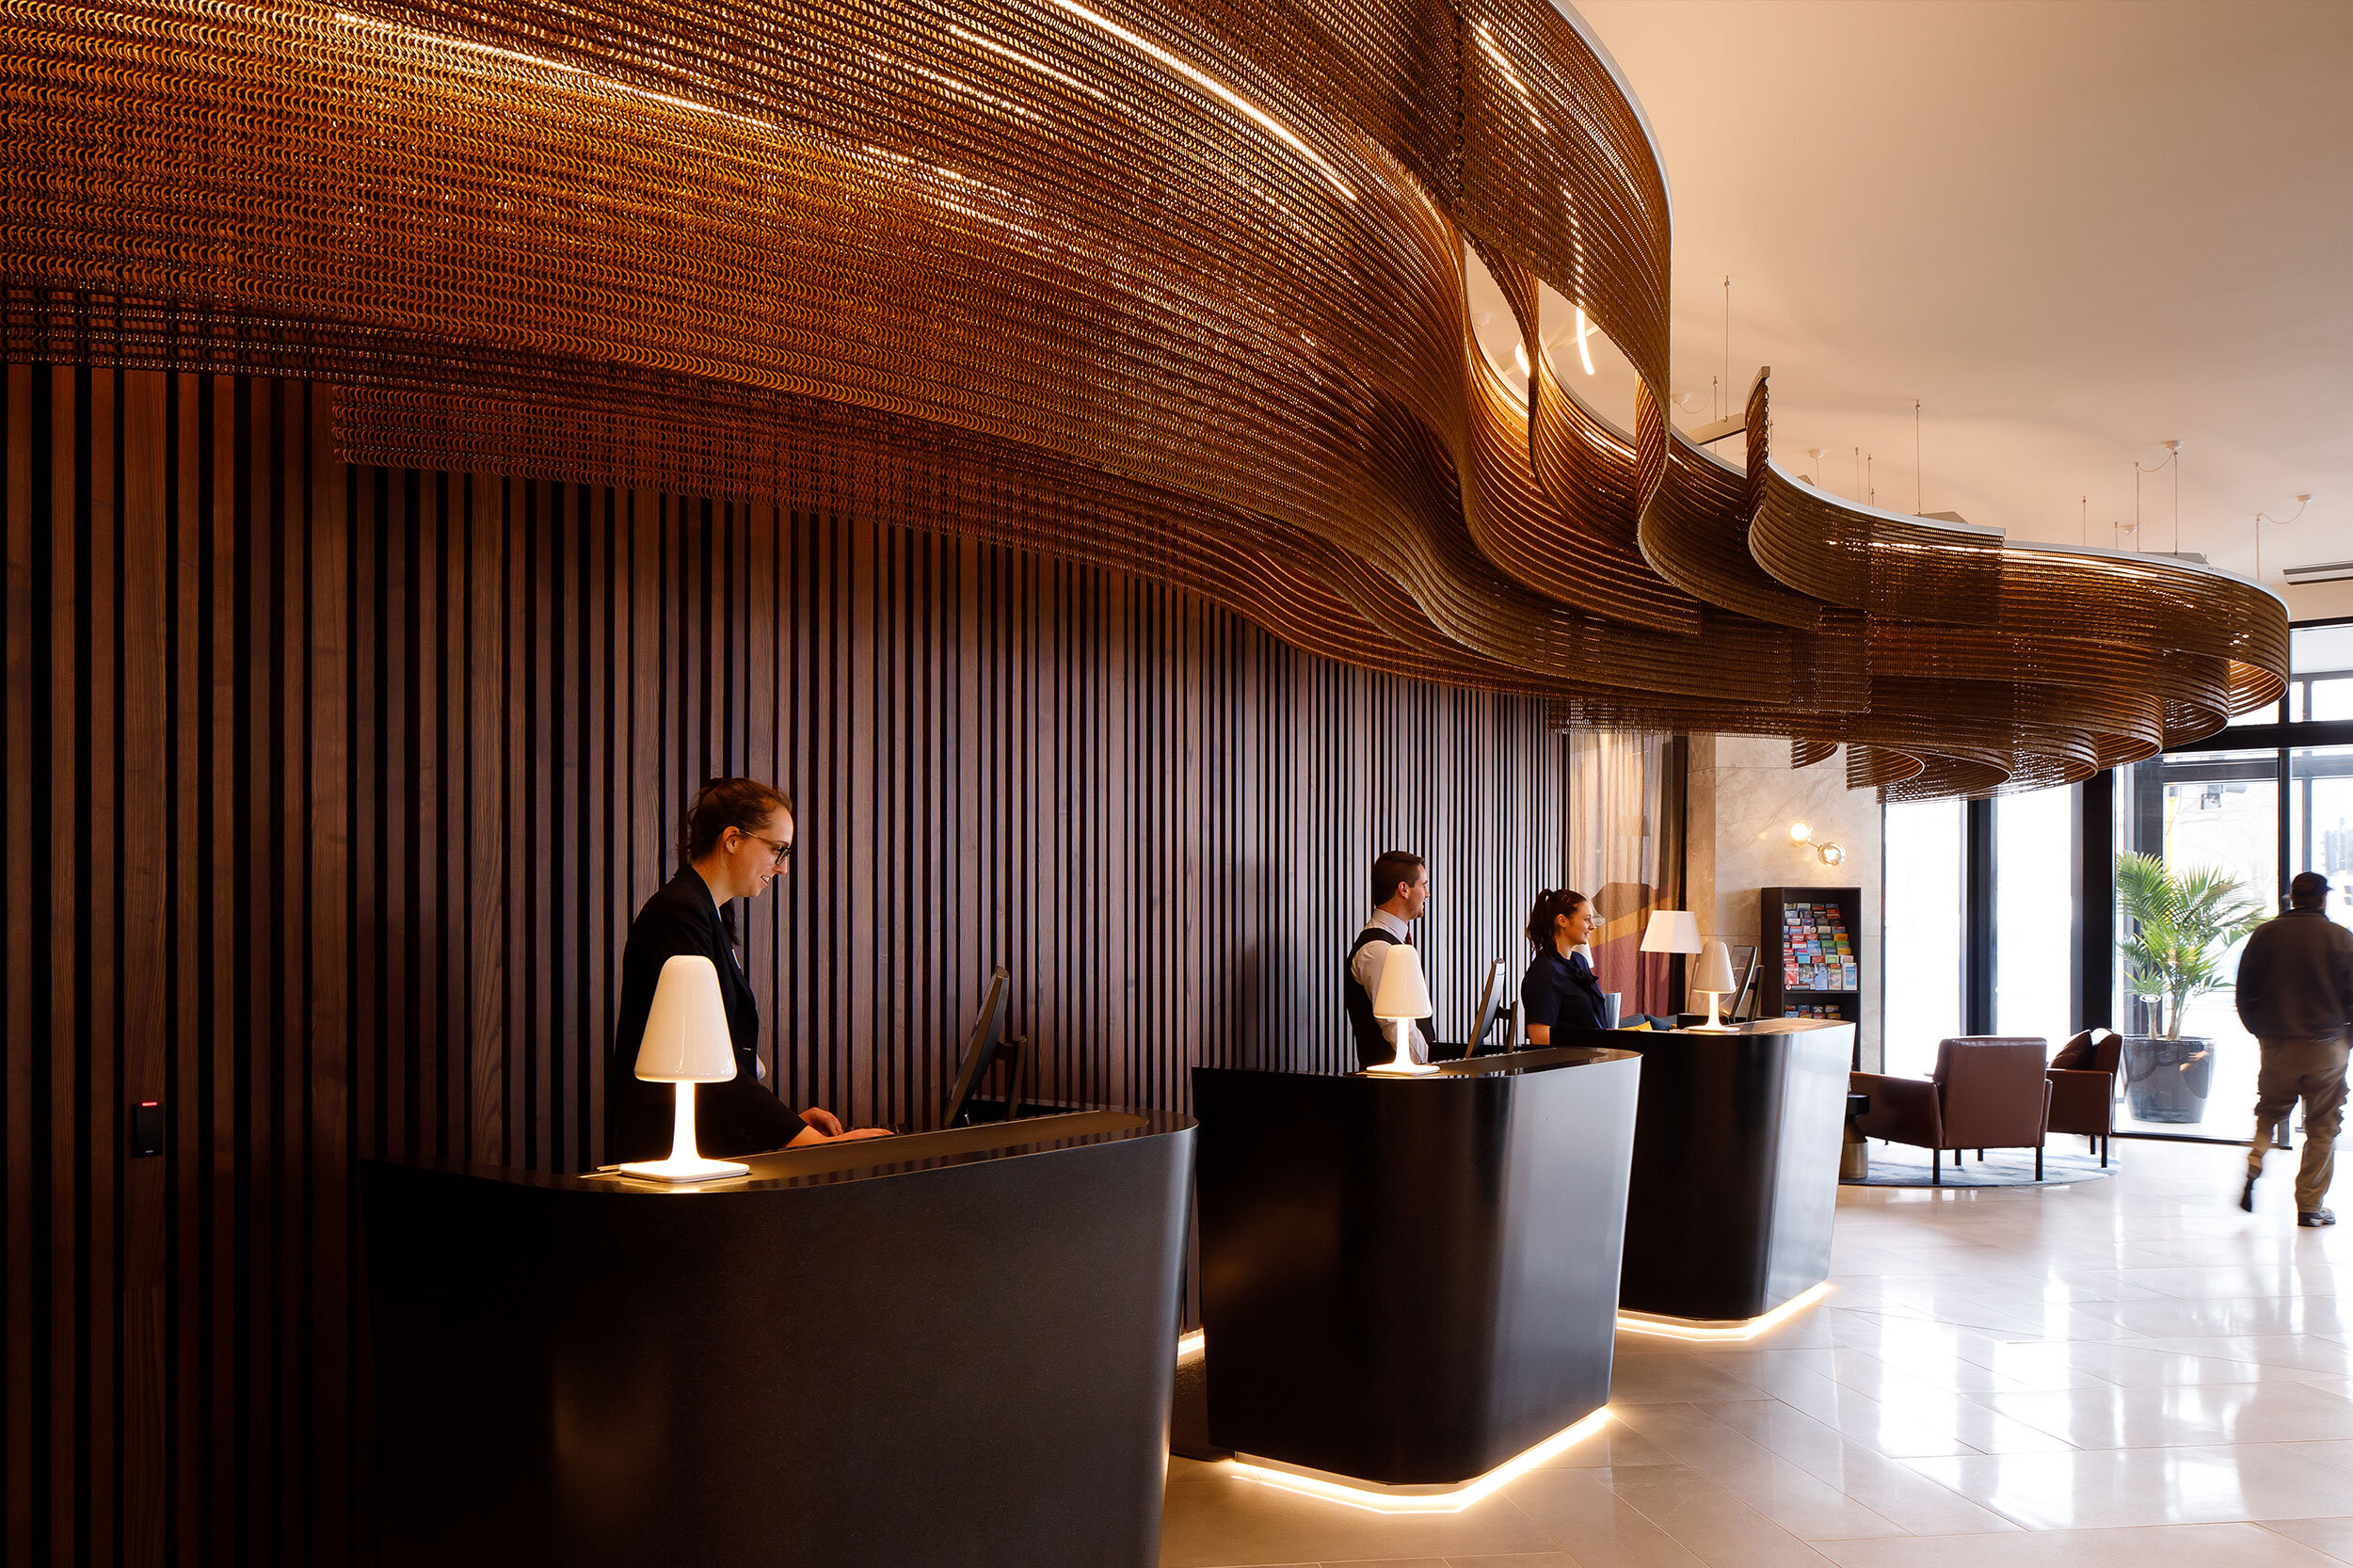 Sculptural Ceiling Feature for Crowne Plaza Hotel